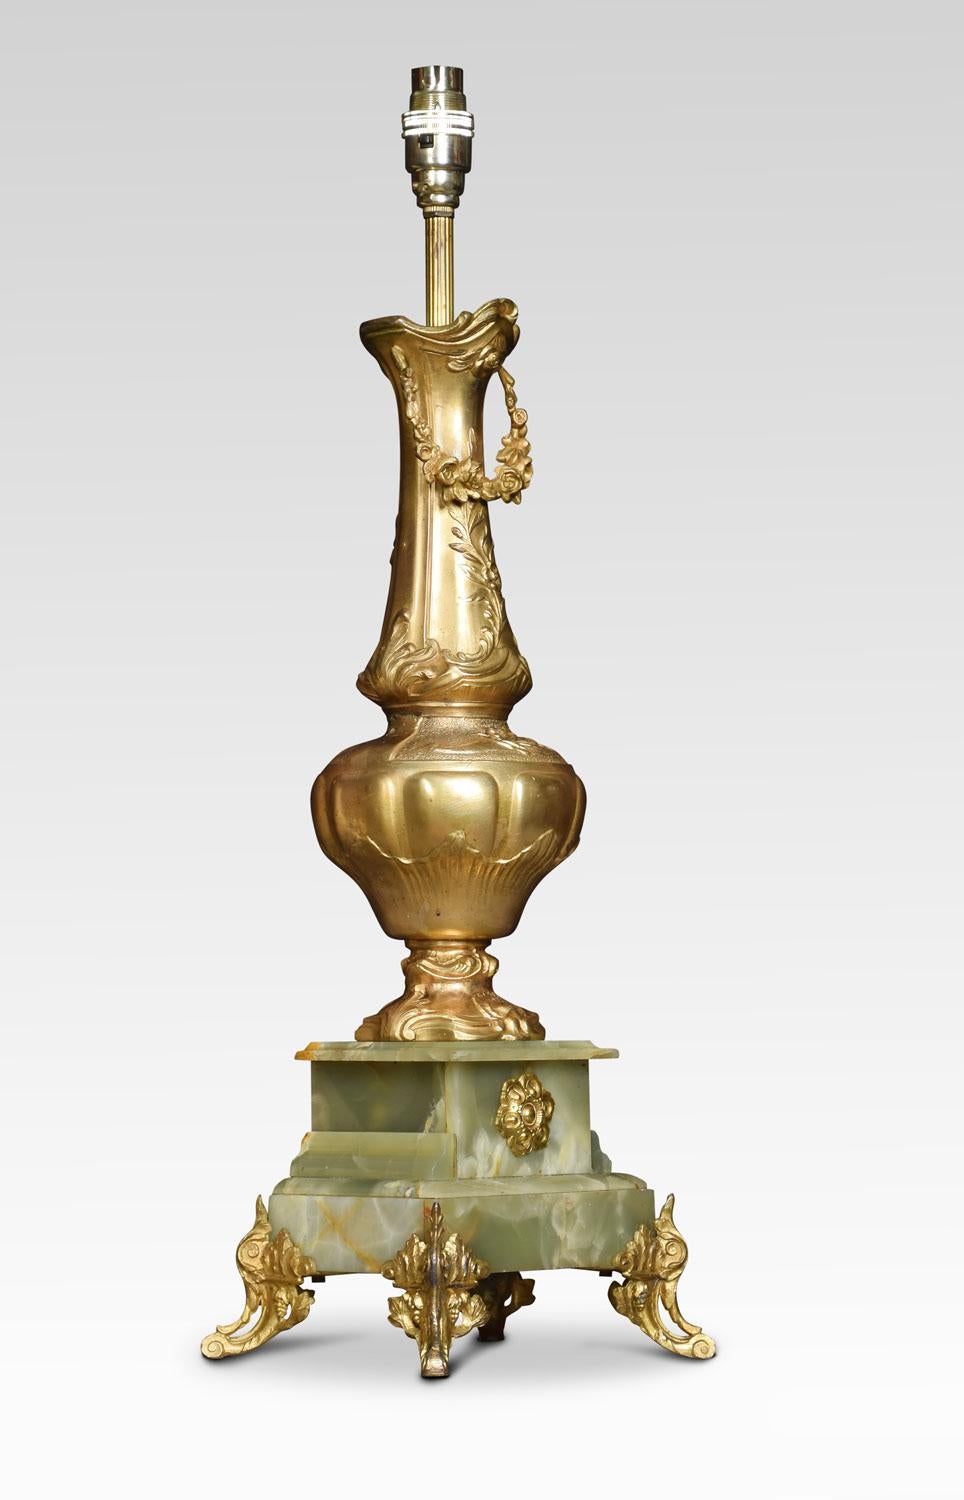 Gilded metal and onyx table lamp of vase form raised up on square plinth terminating in foliating scrolling feet. Together with silk shade.
Dimensions:
Height 23 inches height with shade 35.5 inches
Width 7.5 inches
Depth 6 inches.